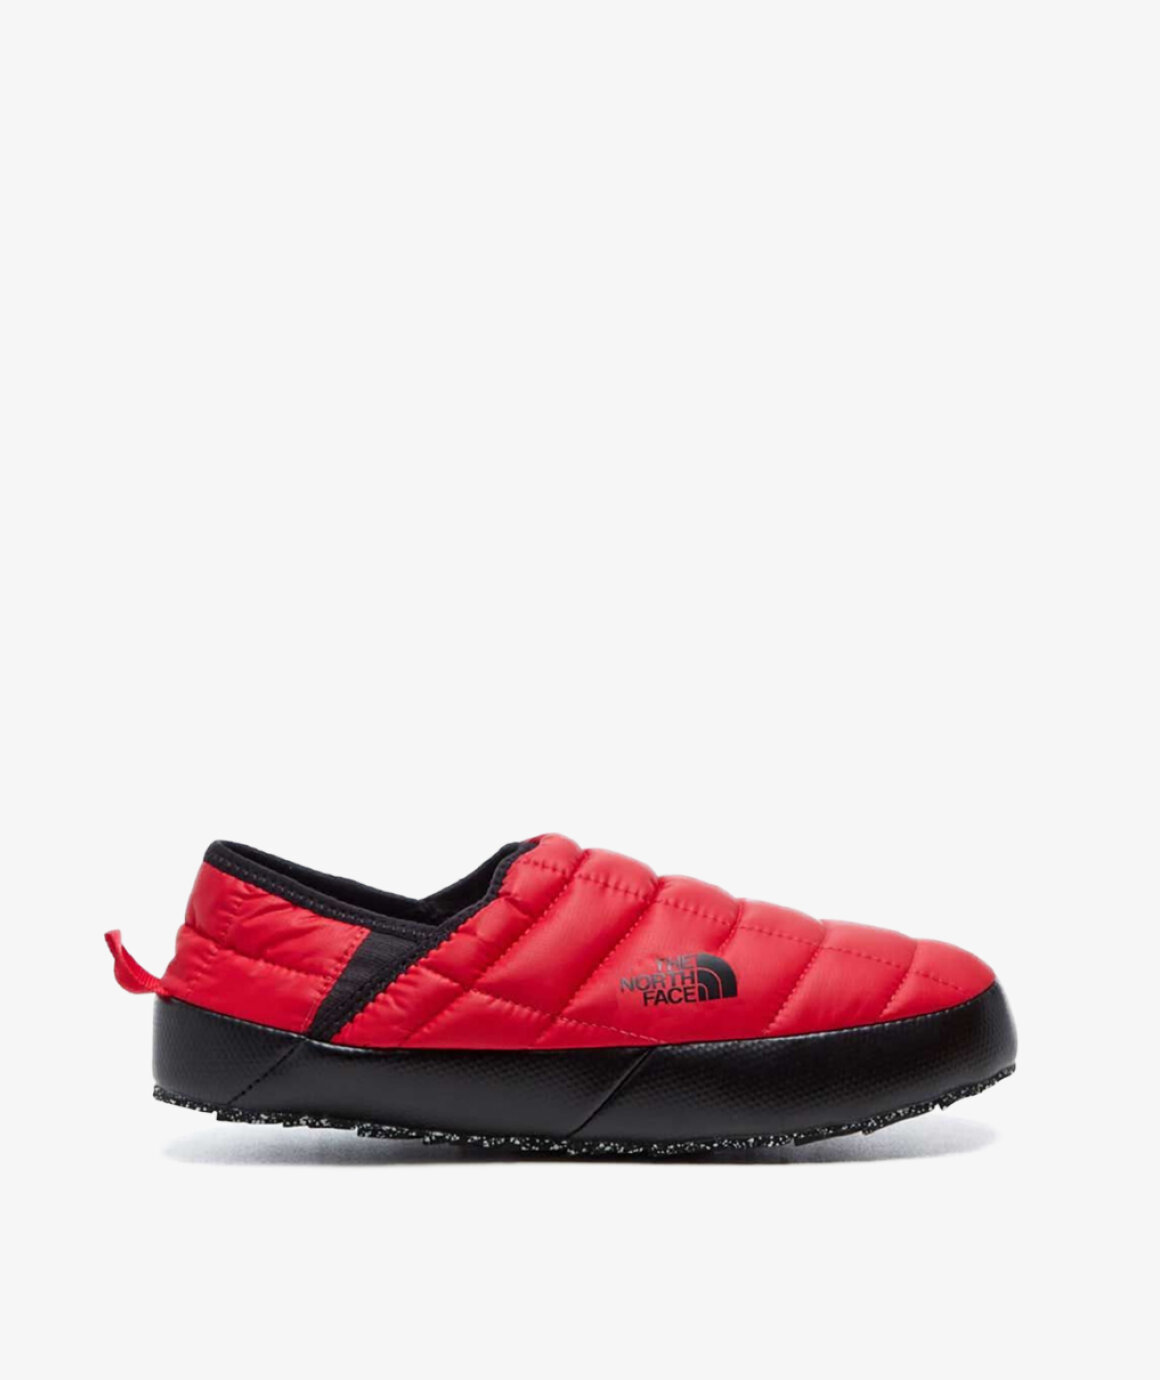 Norse Store | Shipping Worldwide - The North Face Traction Mule - Red ...